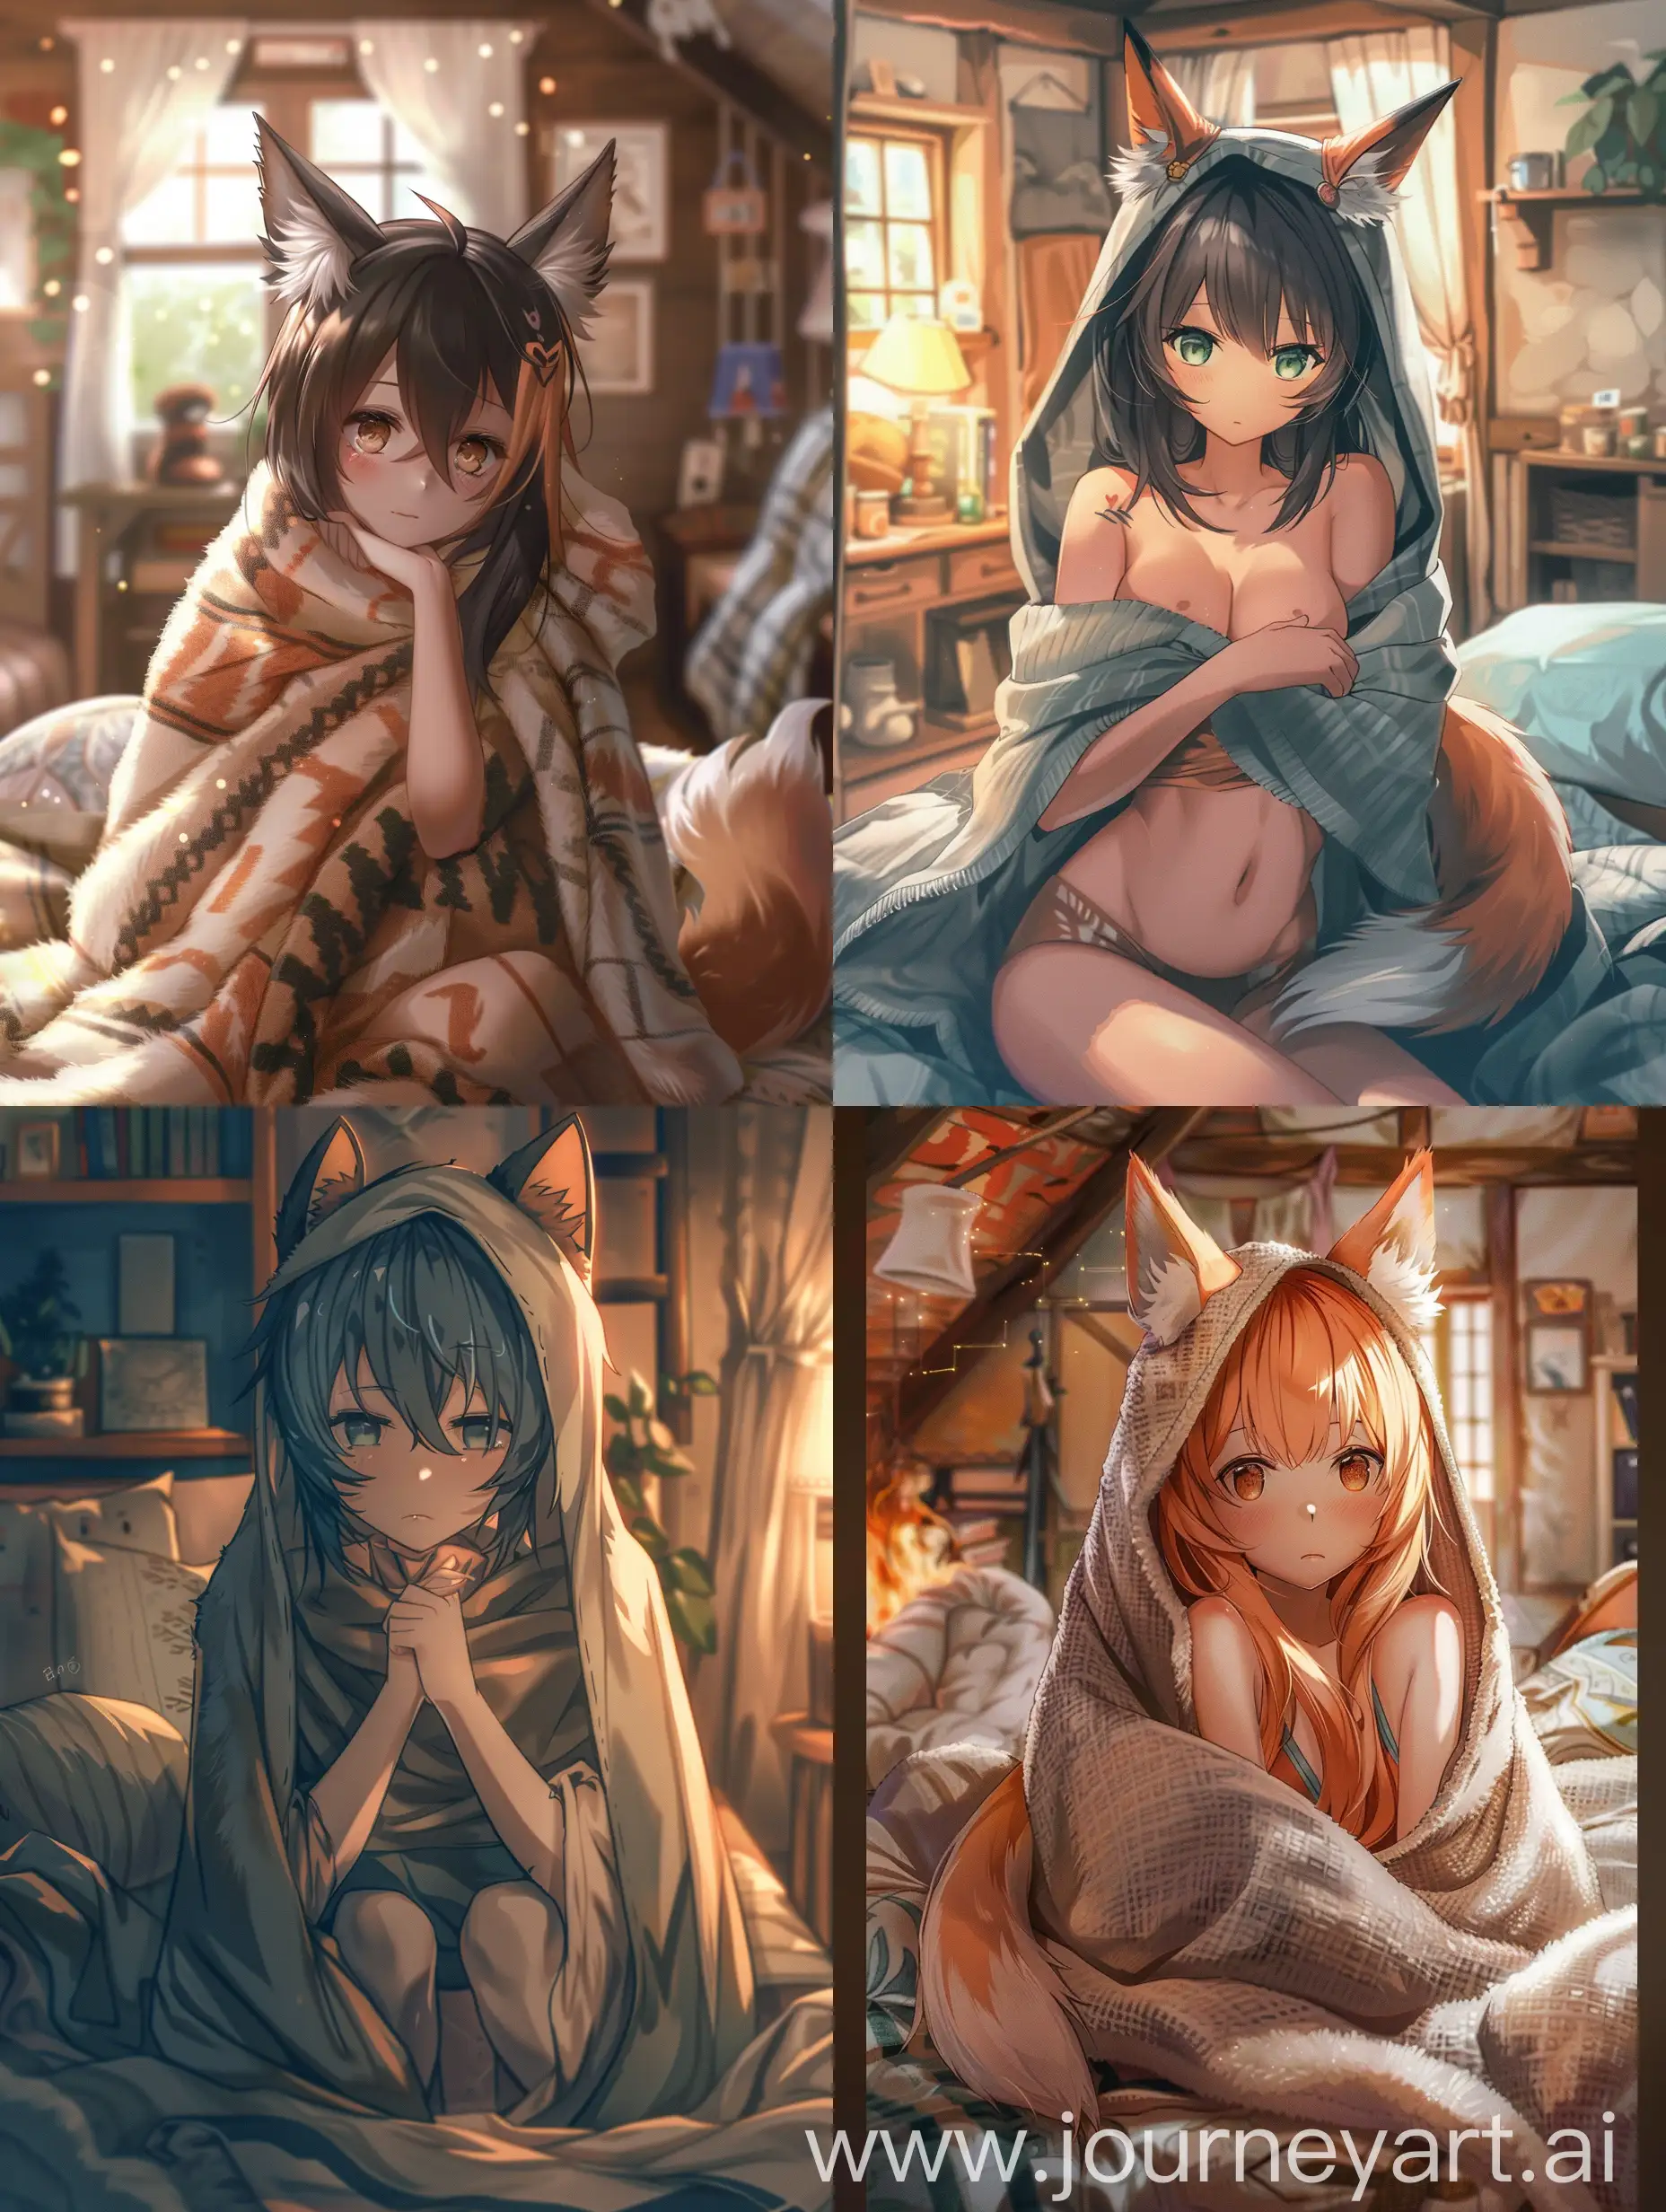 Cozy-Anime-Femboy-with-Fox-Ears-and-Tail-Wrapped-in-Blanket